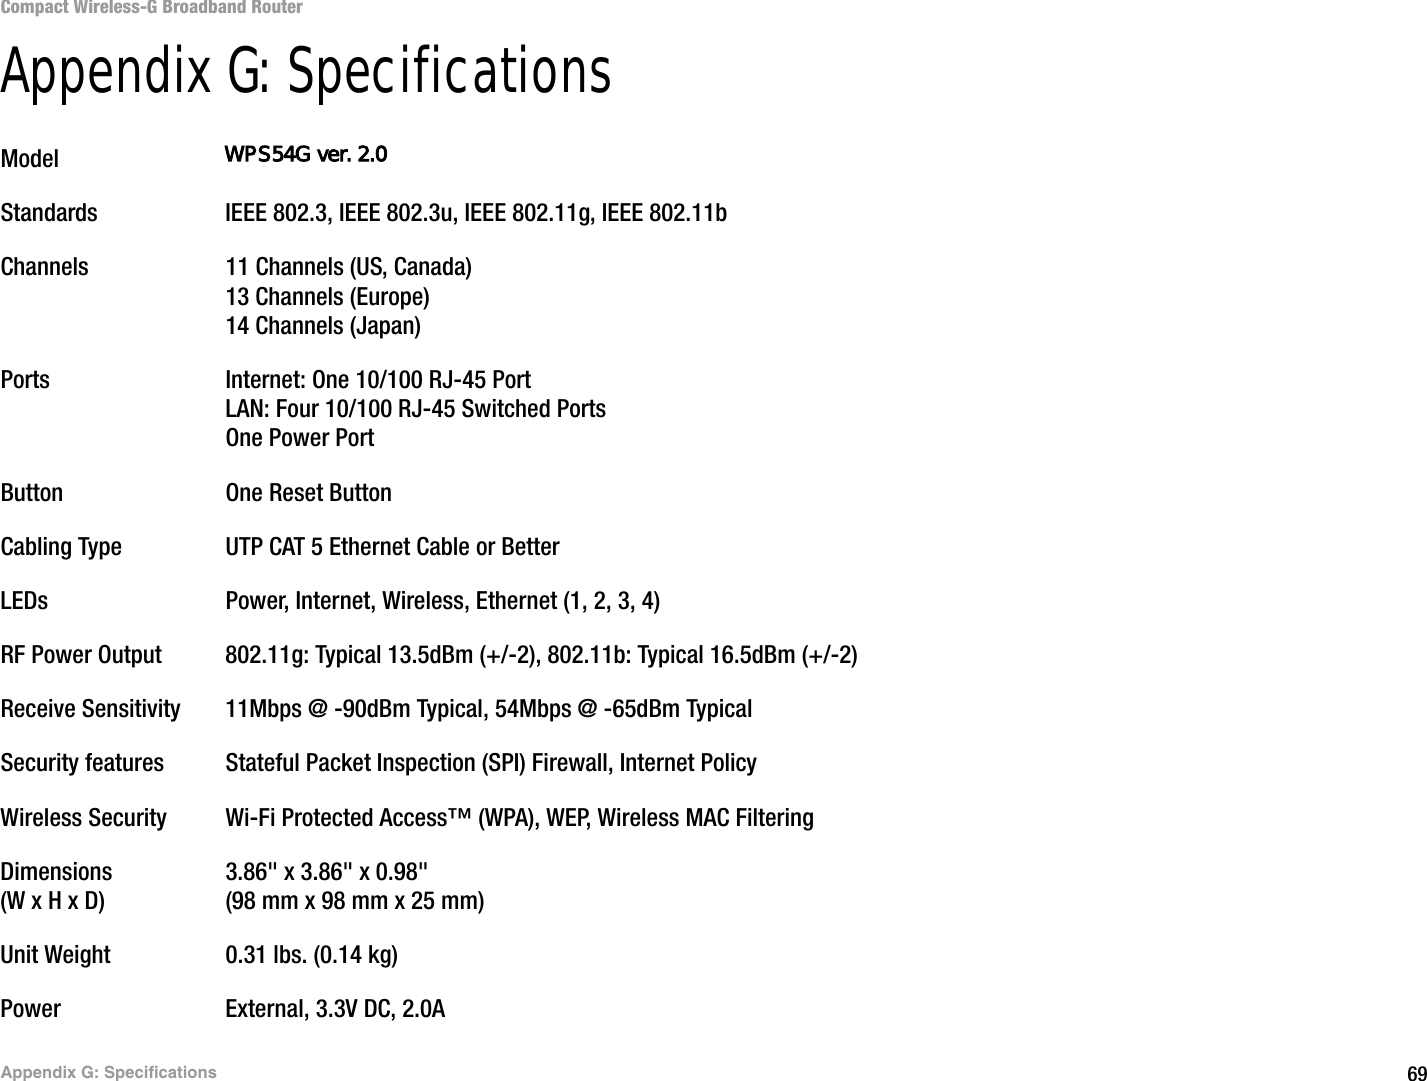 69Appendix G: SpecificationsCompact Wireless-G Broadband RouterAppendix G: SpecificationsModel WRT54GCStandards IEEE 802.3, IEEE 802.3u, IEEE 802.11g, IEEE 802.11bChannels 11 Channels (US, Canada)13 Channels (Europe)14 Channels (Japan) Ports Internet: One 10/100 RJ-45 Port LAN: Four 10/100 RJ-45 Switched PortsOne Power PortButton One Reset ButtonCabling Type UTP CAT 5 Ethernet Cable or BetterLEDs Power, Internet, Wireless, Ethernet (1, 2, 3, 4)RF Power Output 802.11g: Typical 13.5dBm (+/-2), 802.11b: Typical 16.5dBm (+/-2)Receive Sensitivity 11Mbps @ -90dBm Typical, 54Mbps @ -65dBm TypicalSecurity features Stateful Packet Inspection (SPI) Firewall, Internet PolicyWireless Security Wi-Fi Protected Access™ (WPA), WEP, Wireless MAC FilteringDimensions 3.86&quot; x 3.86&quot; x 0.98&quot;(W x H x D) (98 mm x 98 mm x 25 mm)Unit Weight 0.31 lbs. (0.14 kg)Power External, 3.3V DC, 2.0AWPS54G ver. 2.0